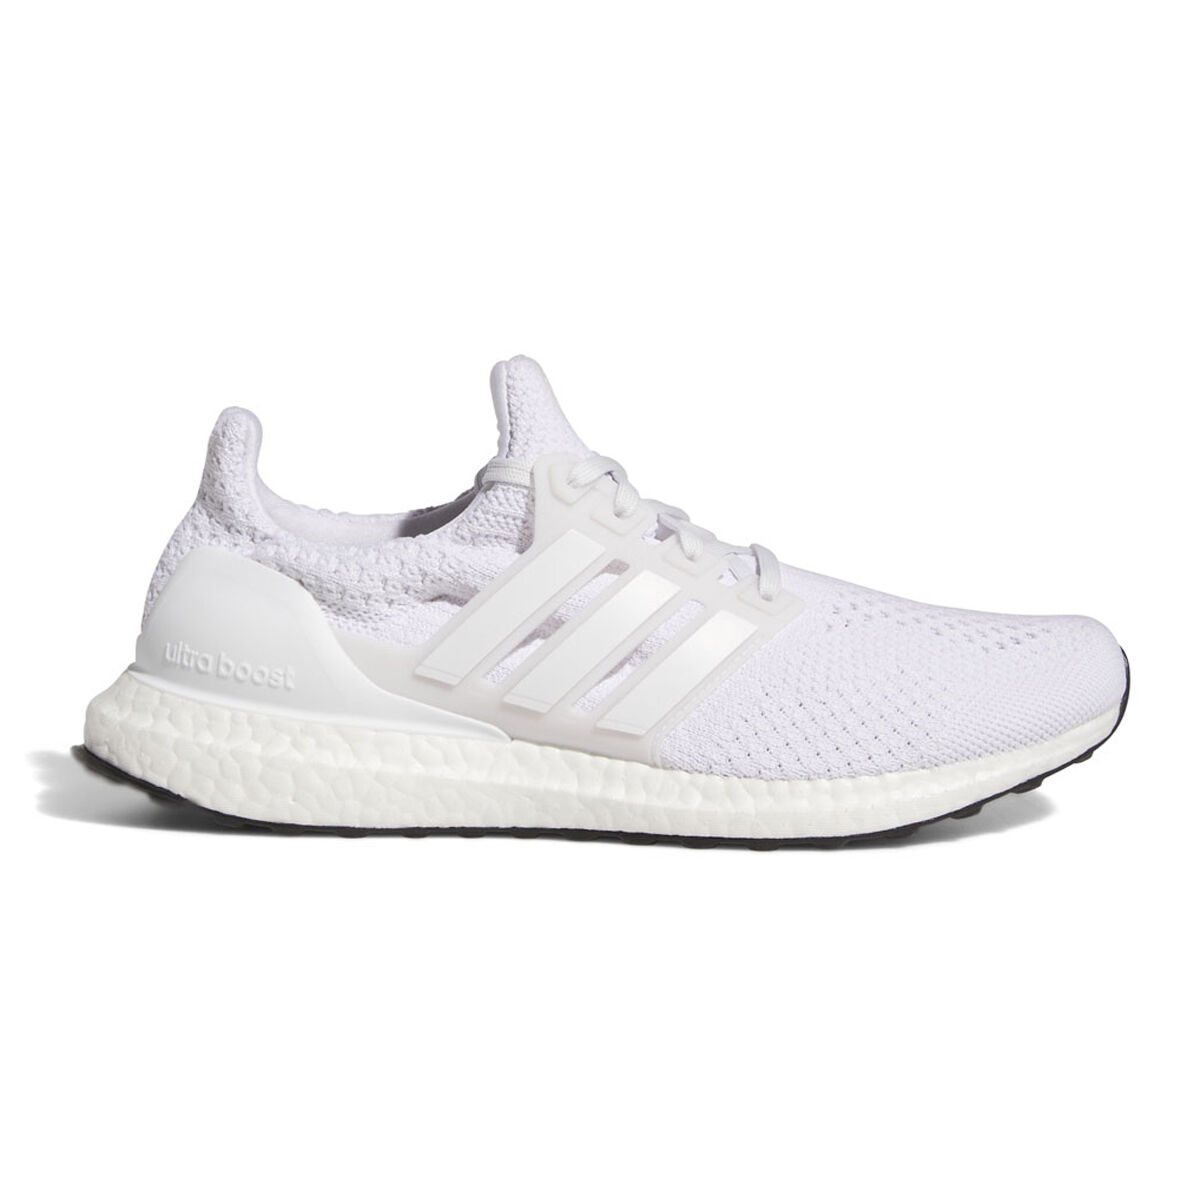 Adidas ULTRABOOST WEB DNA 100% Original Authentic Clover Men's Shoes  Women's Shoes Legal Free Shipping Flagship Store Comfortable and Breathable  Promotions Carnival Popular Design Buffer Summer | Lazada PH